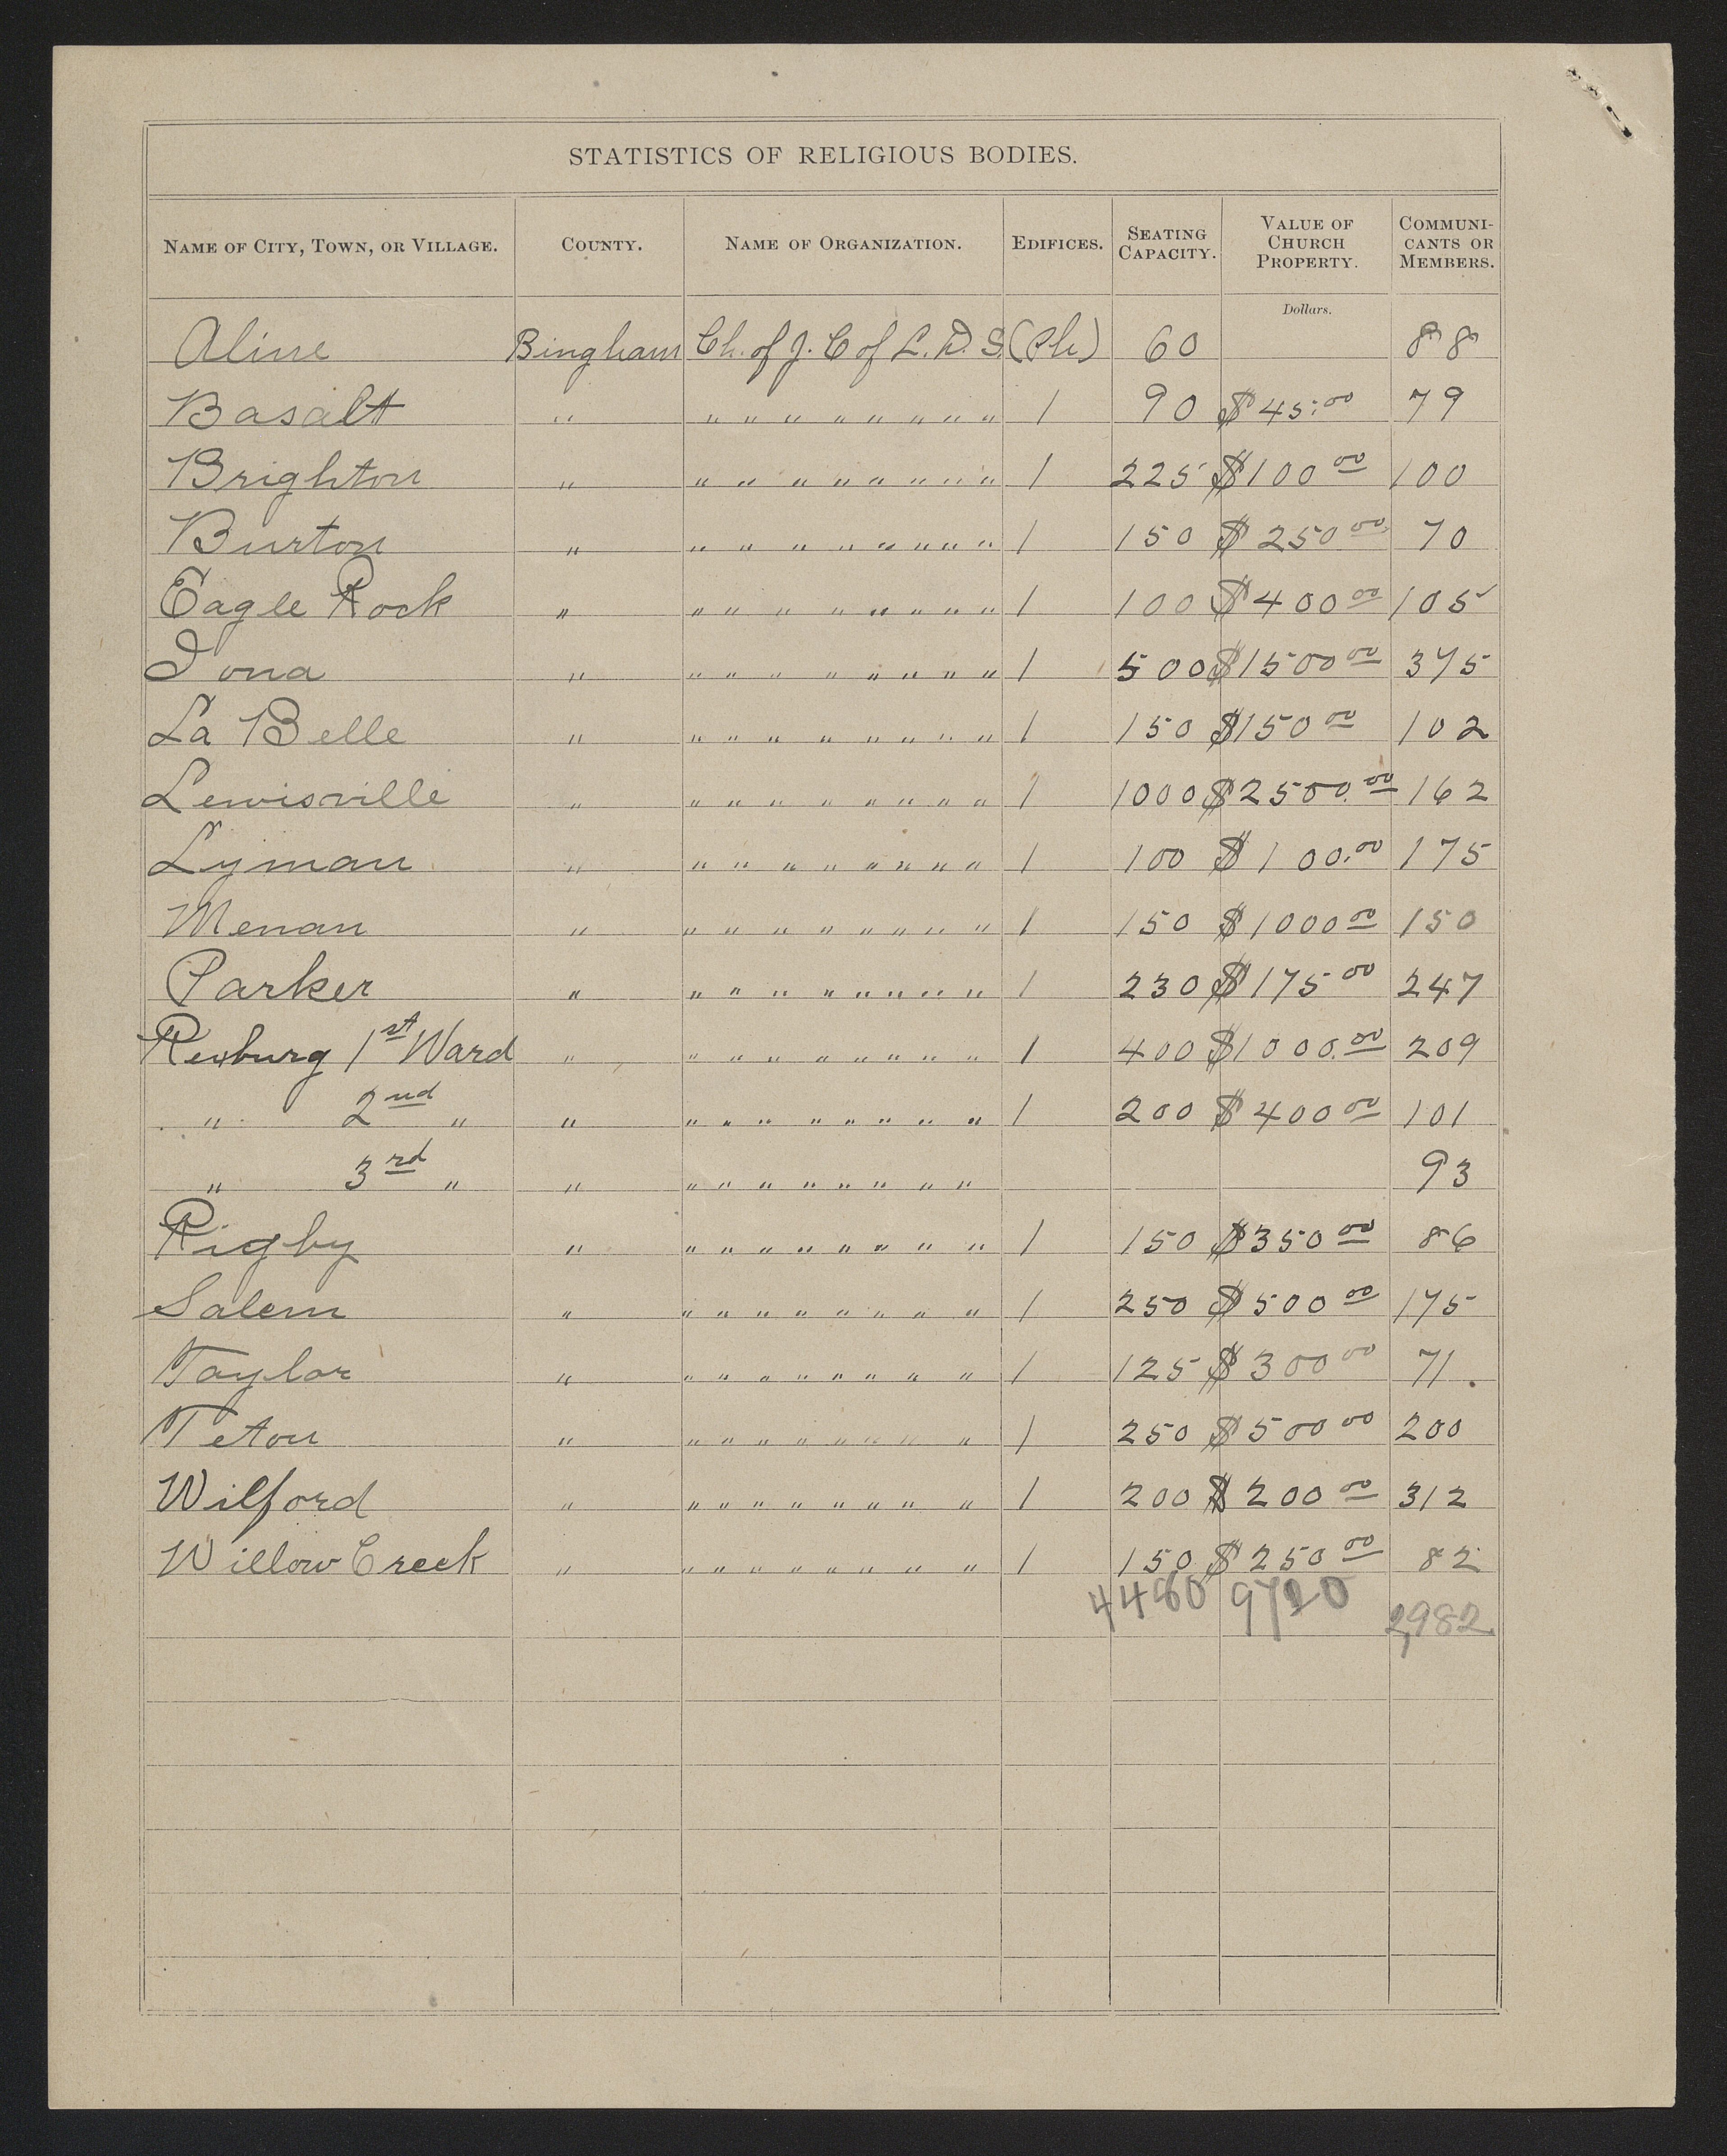 Schedule for the Bannock Stake of the Church of Jesus Christ of Latter-day Saints in the 1890 Census.